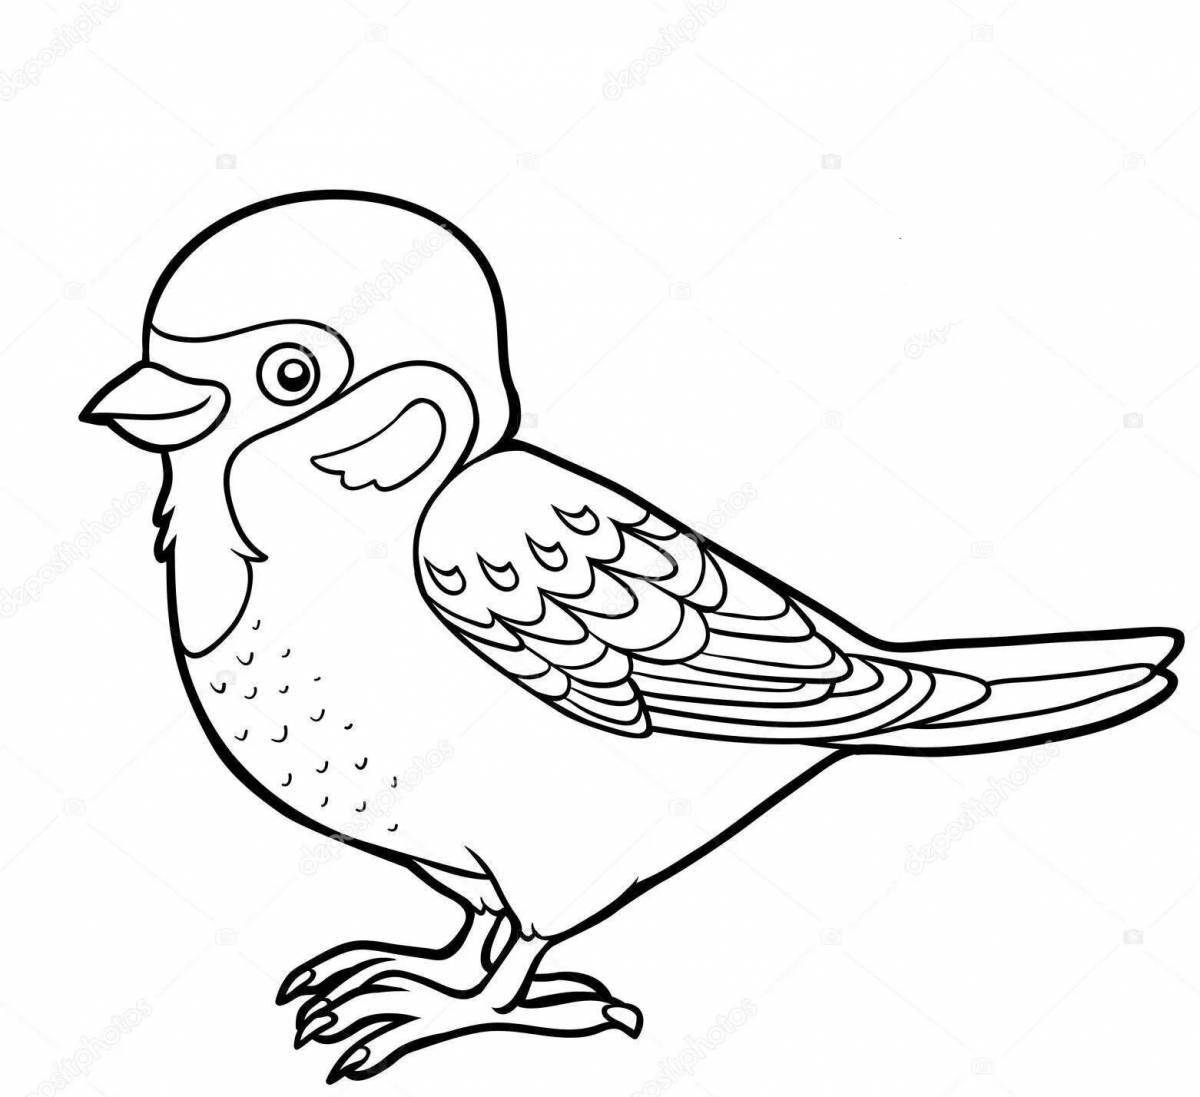 Coloring page of a brilliantly colored sparrow